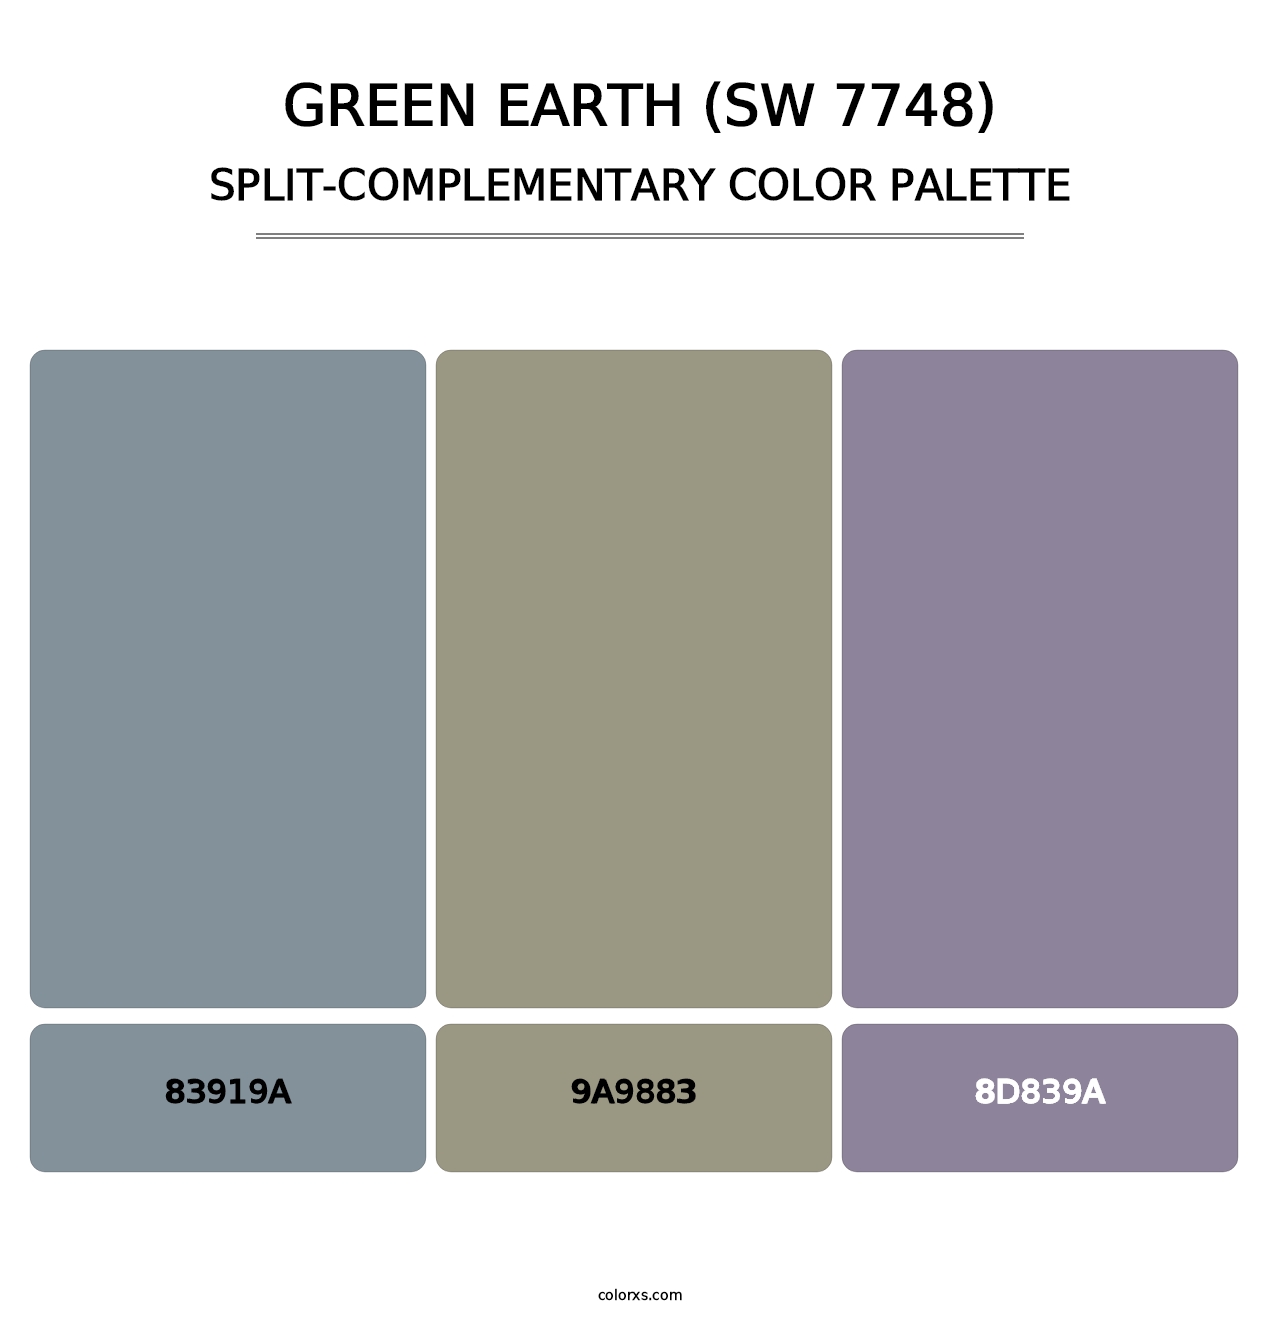 Green Earth (SW 7748) - Split-Complementary Color Palette